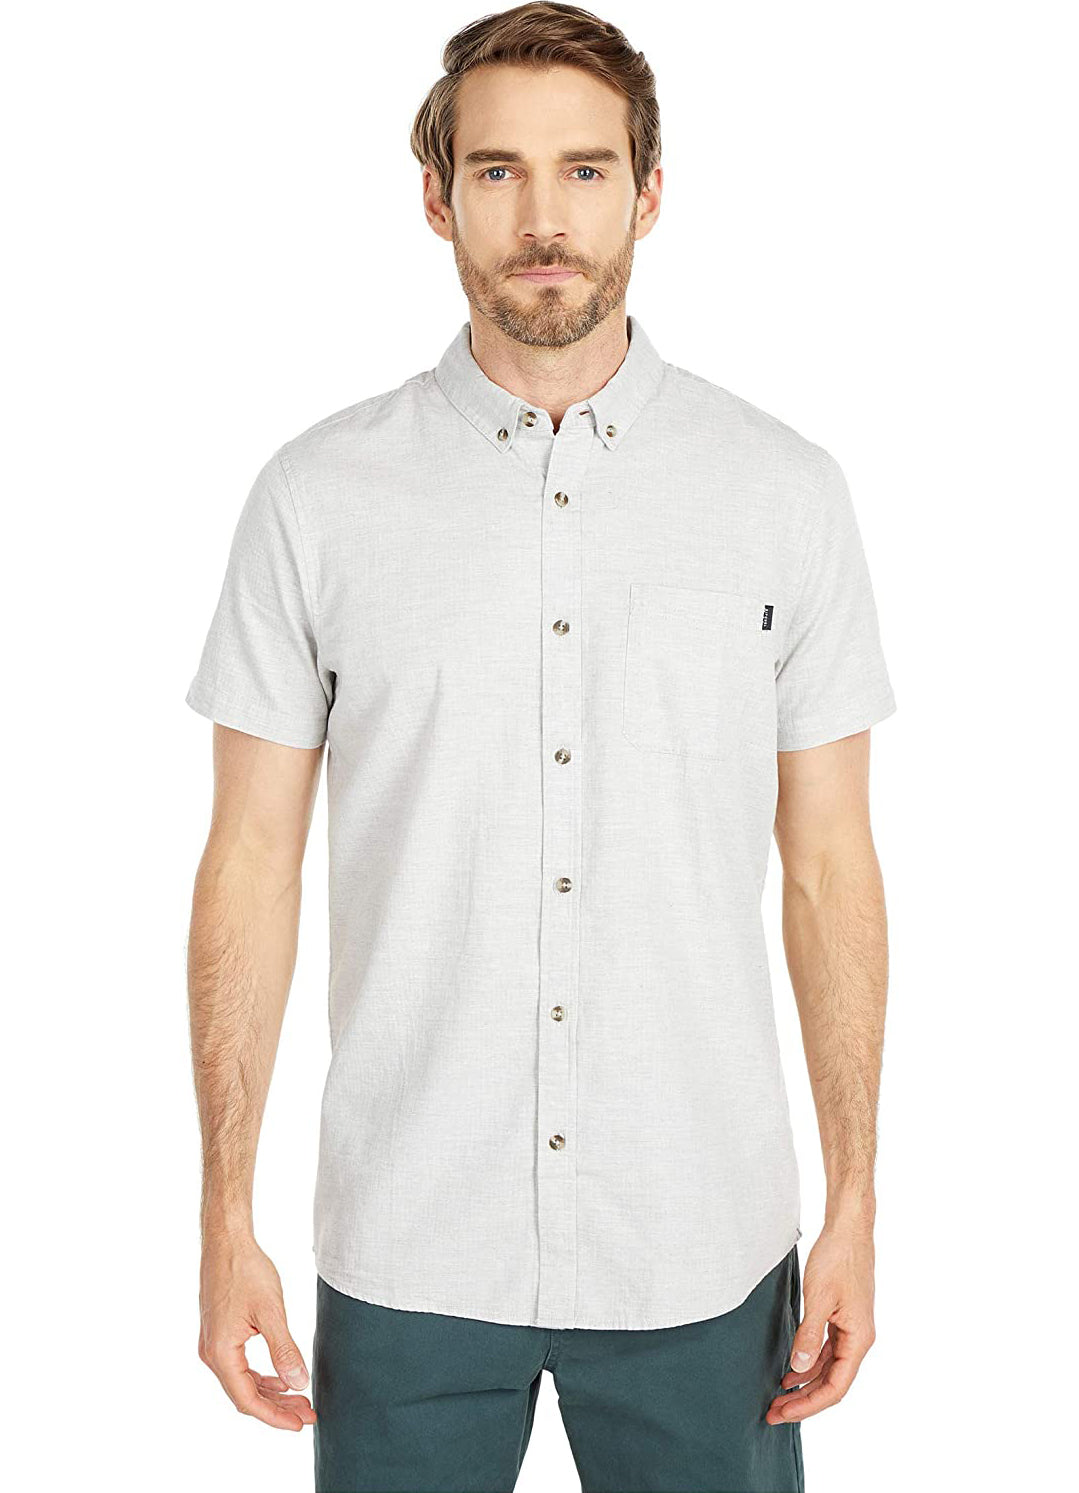 Rip Curl Ourtime Short Sleeve Button Up Shirt